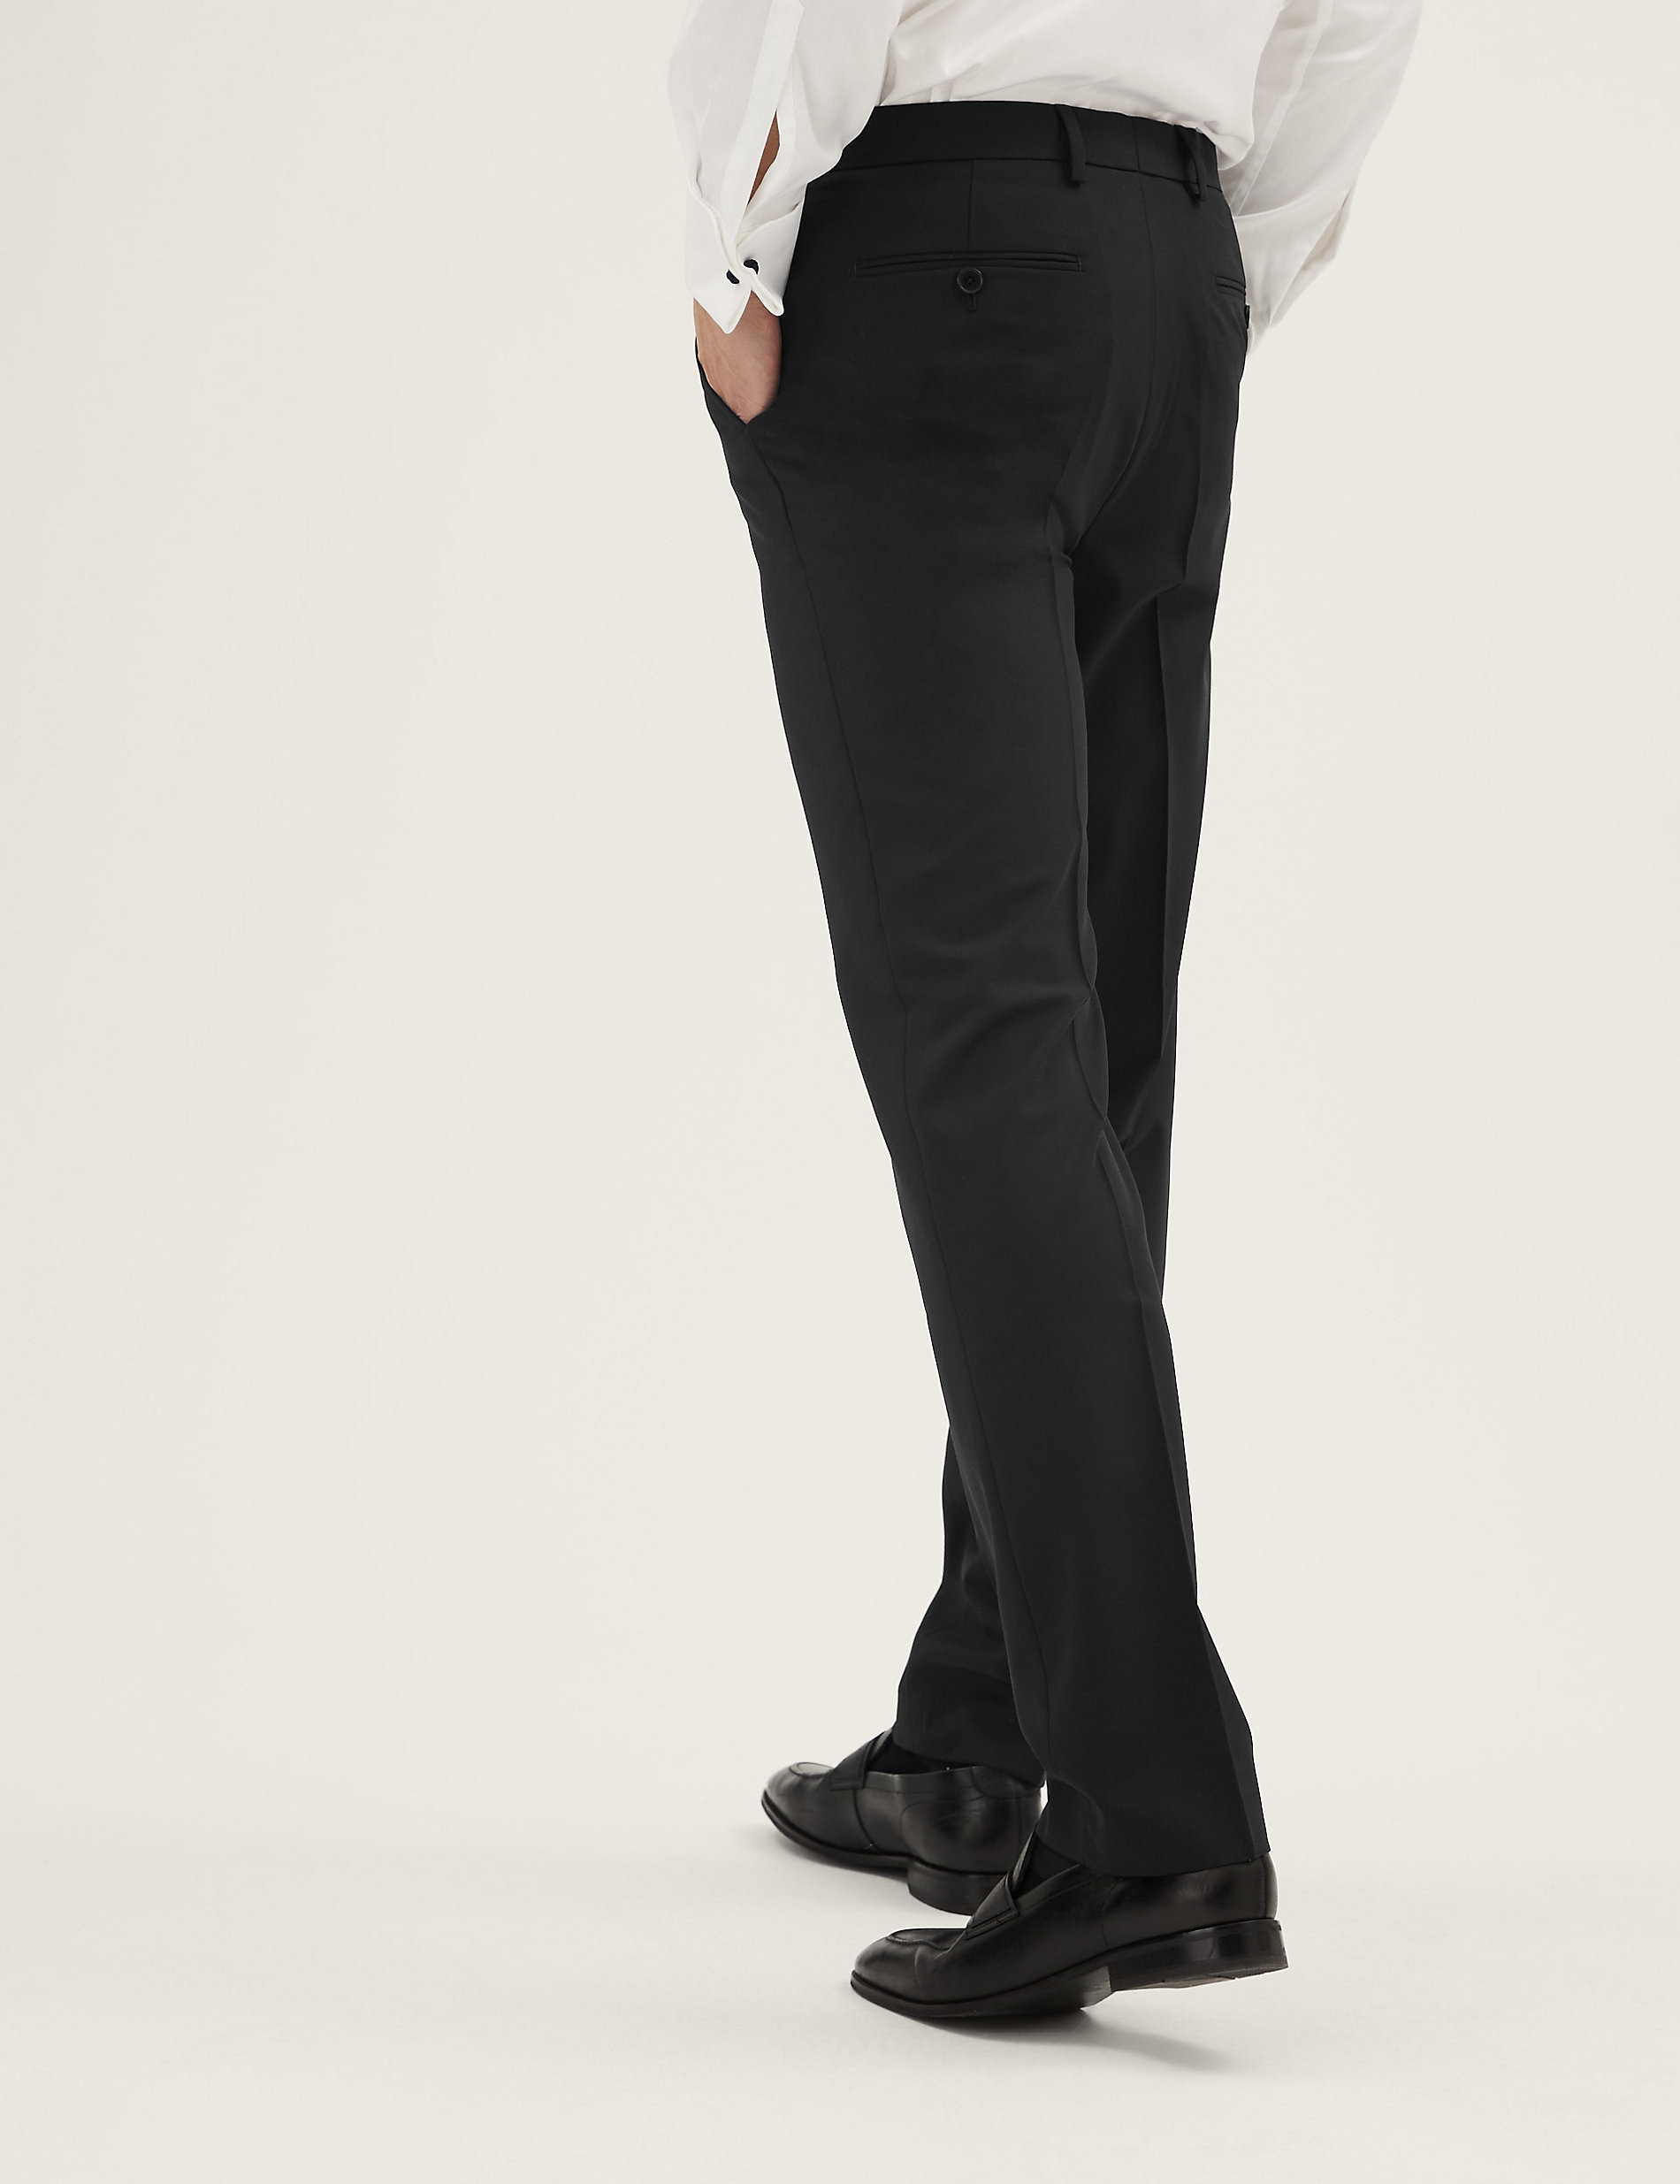 The Ultimate Black Tailored Fit Trousers